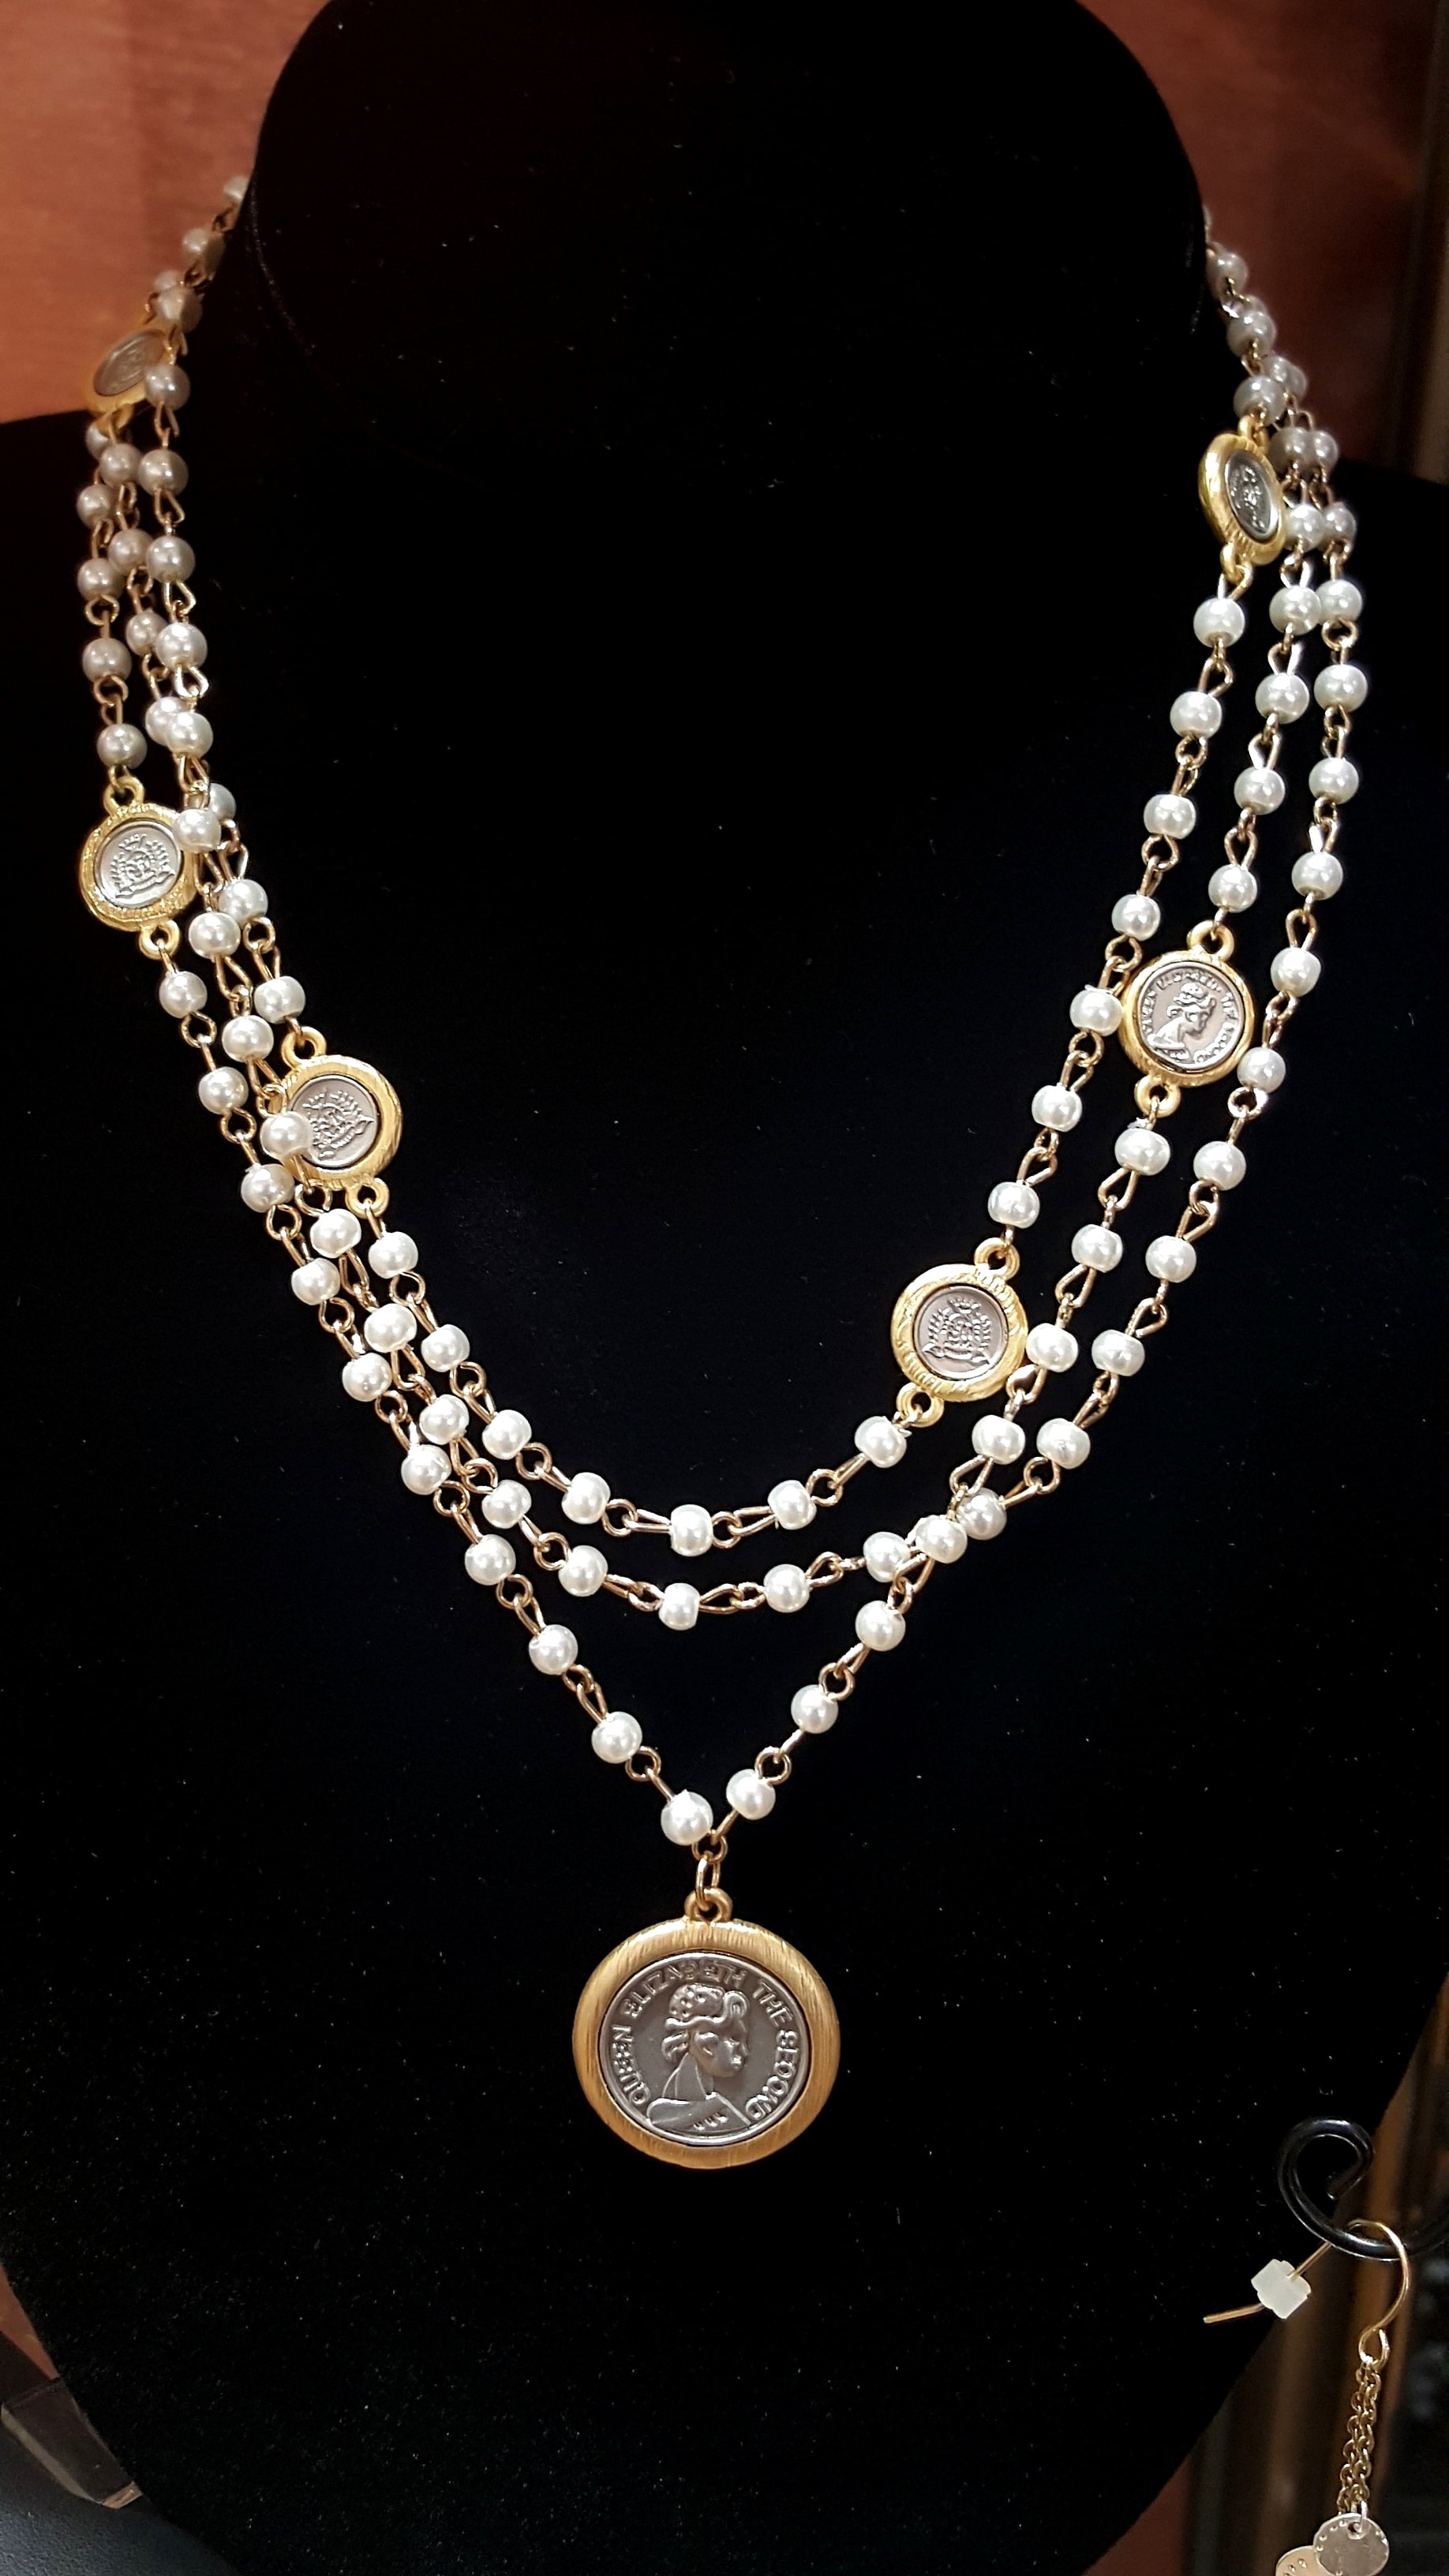 Multi-Strand Pearls Necklace with Coin Pendant | LeilaBox